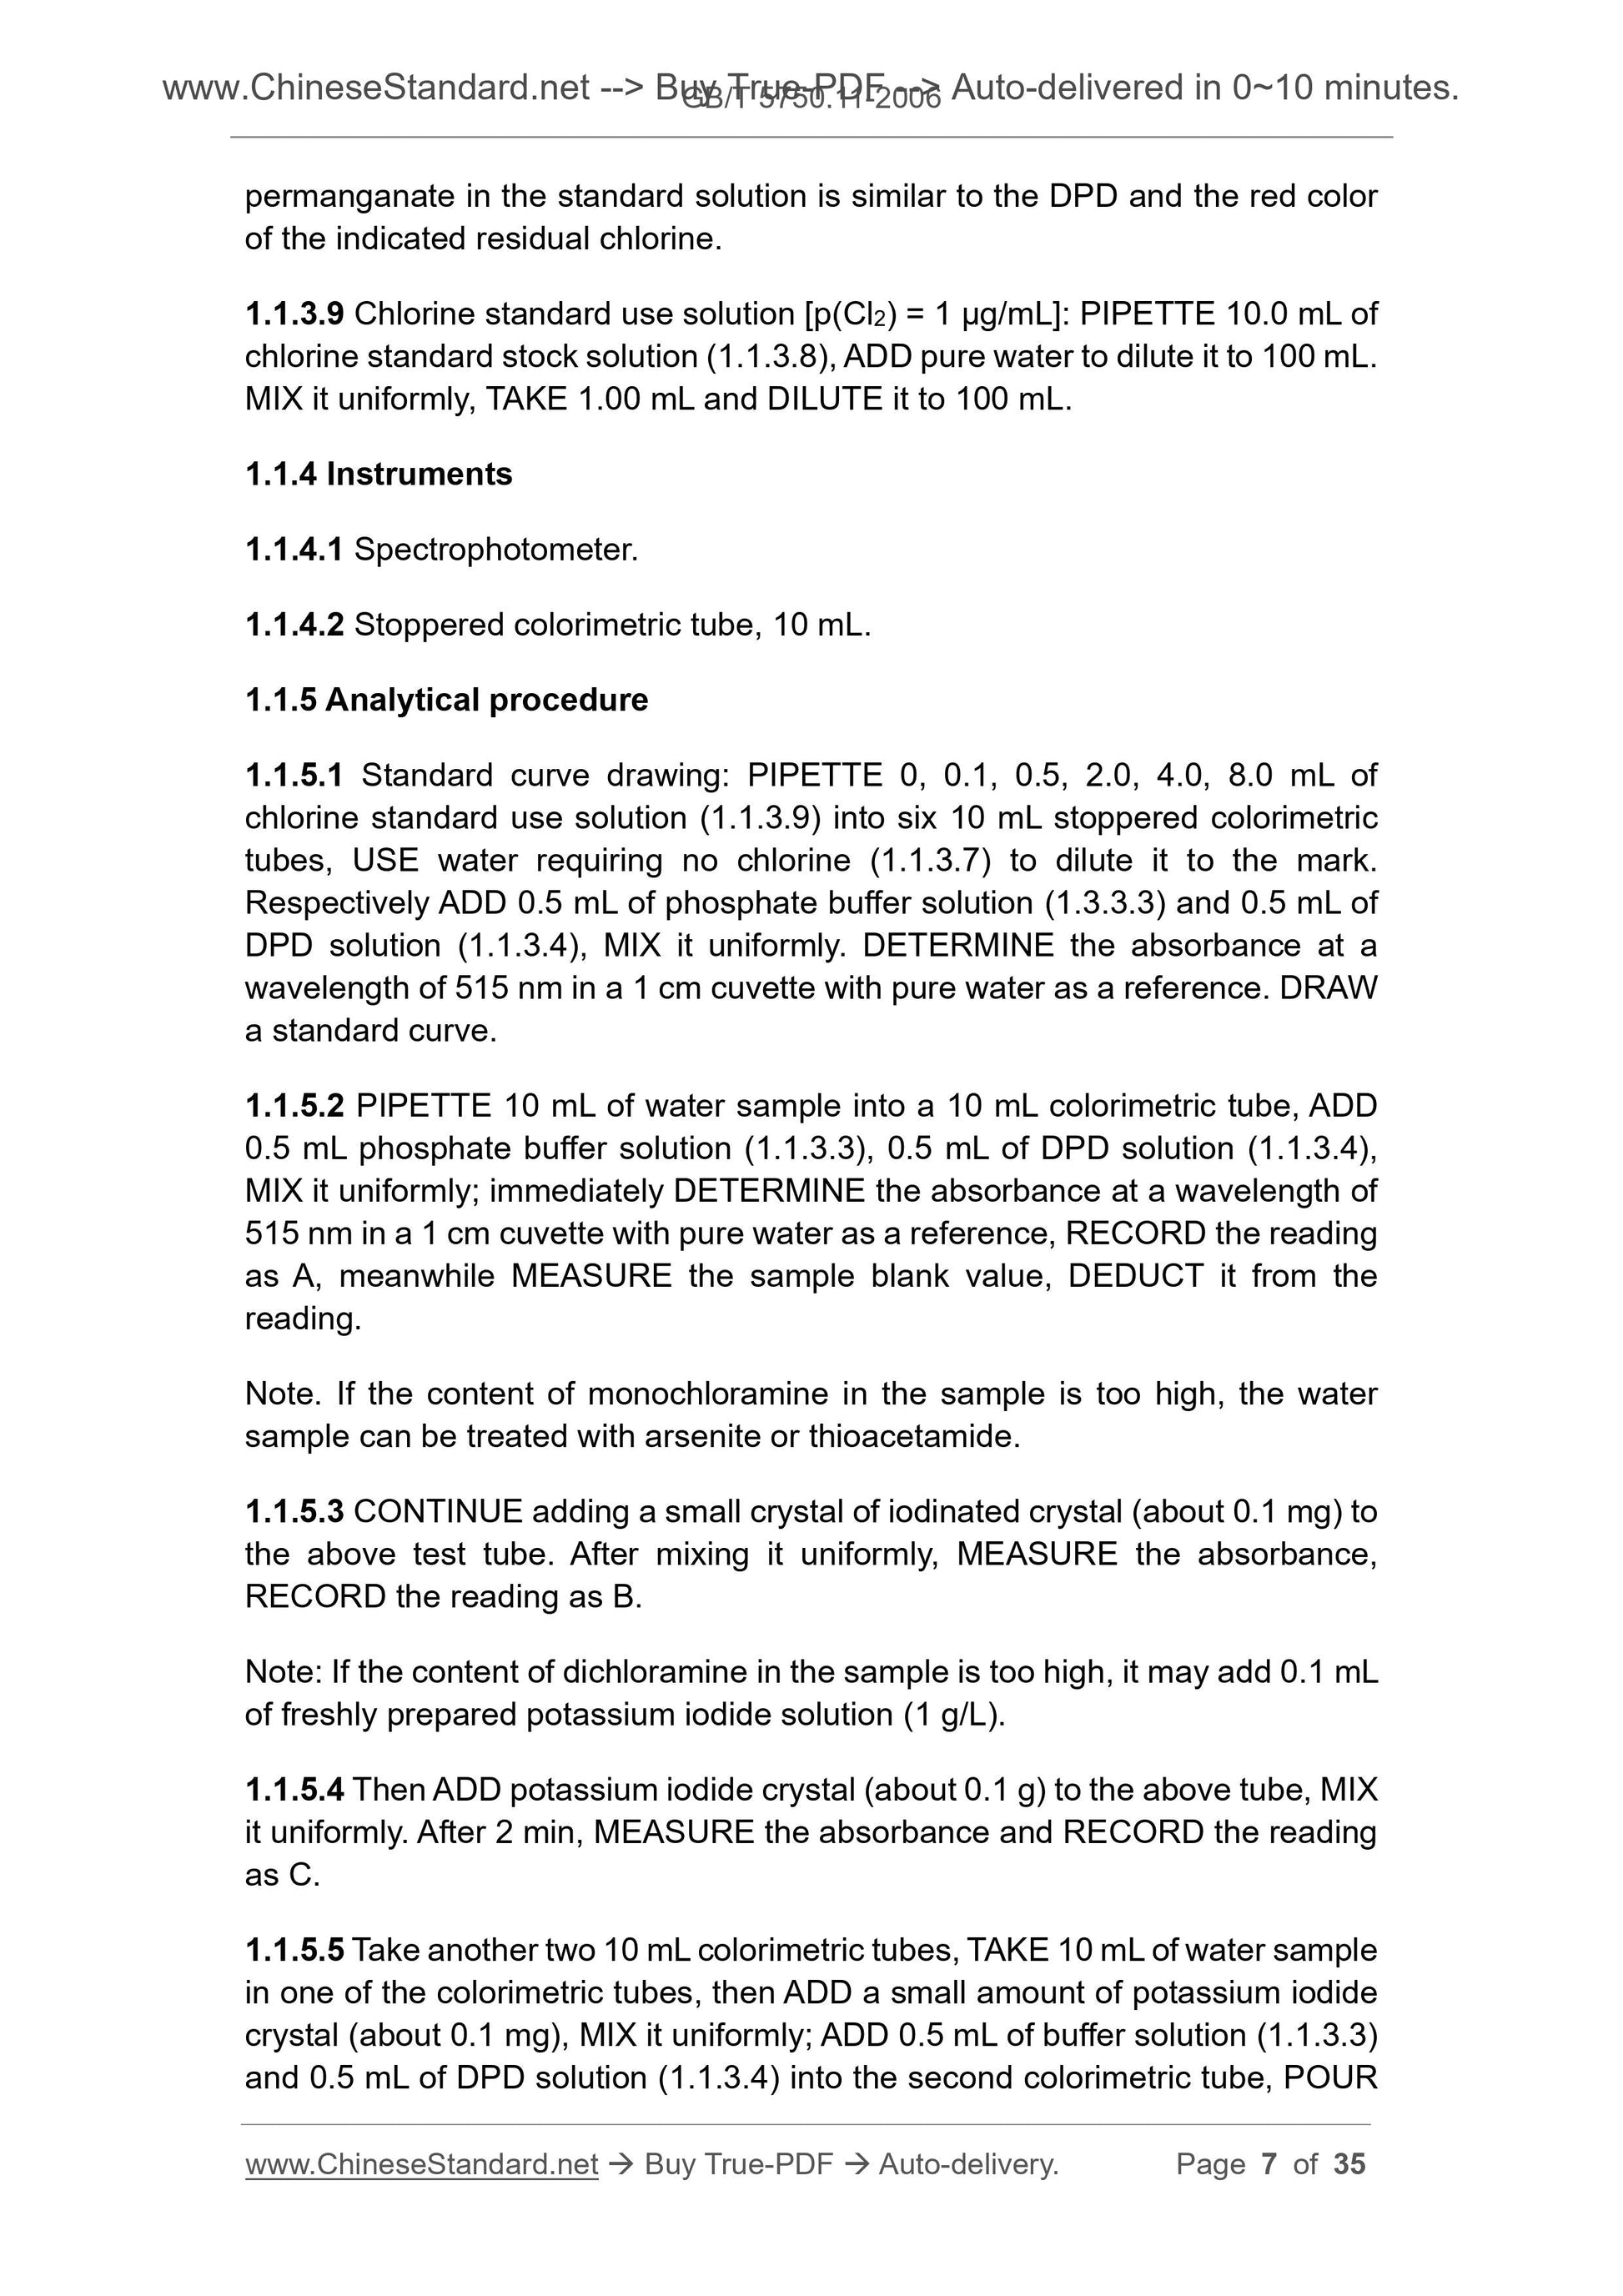 GB/T 5750.11-2006 Page 5